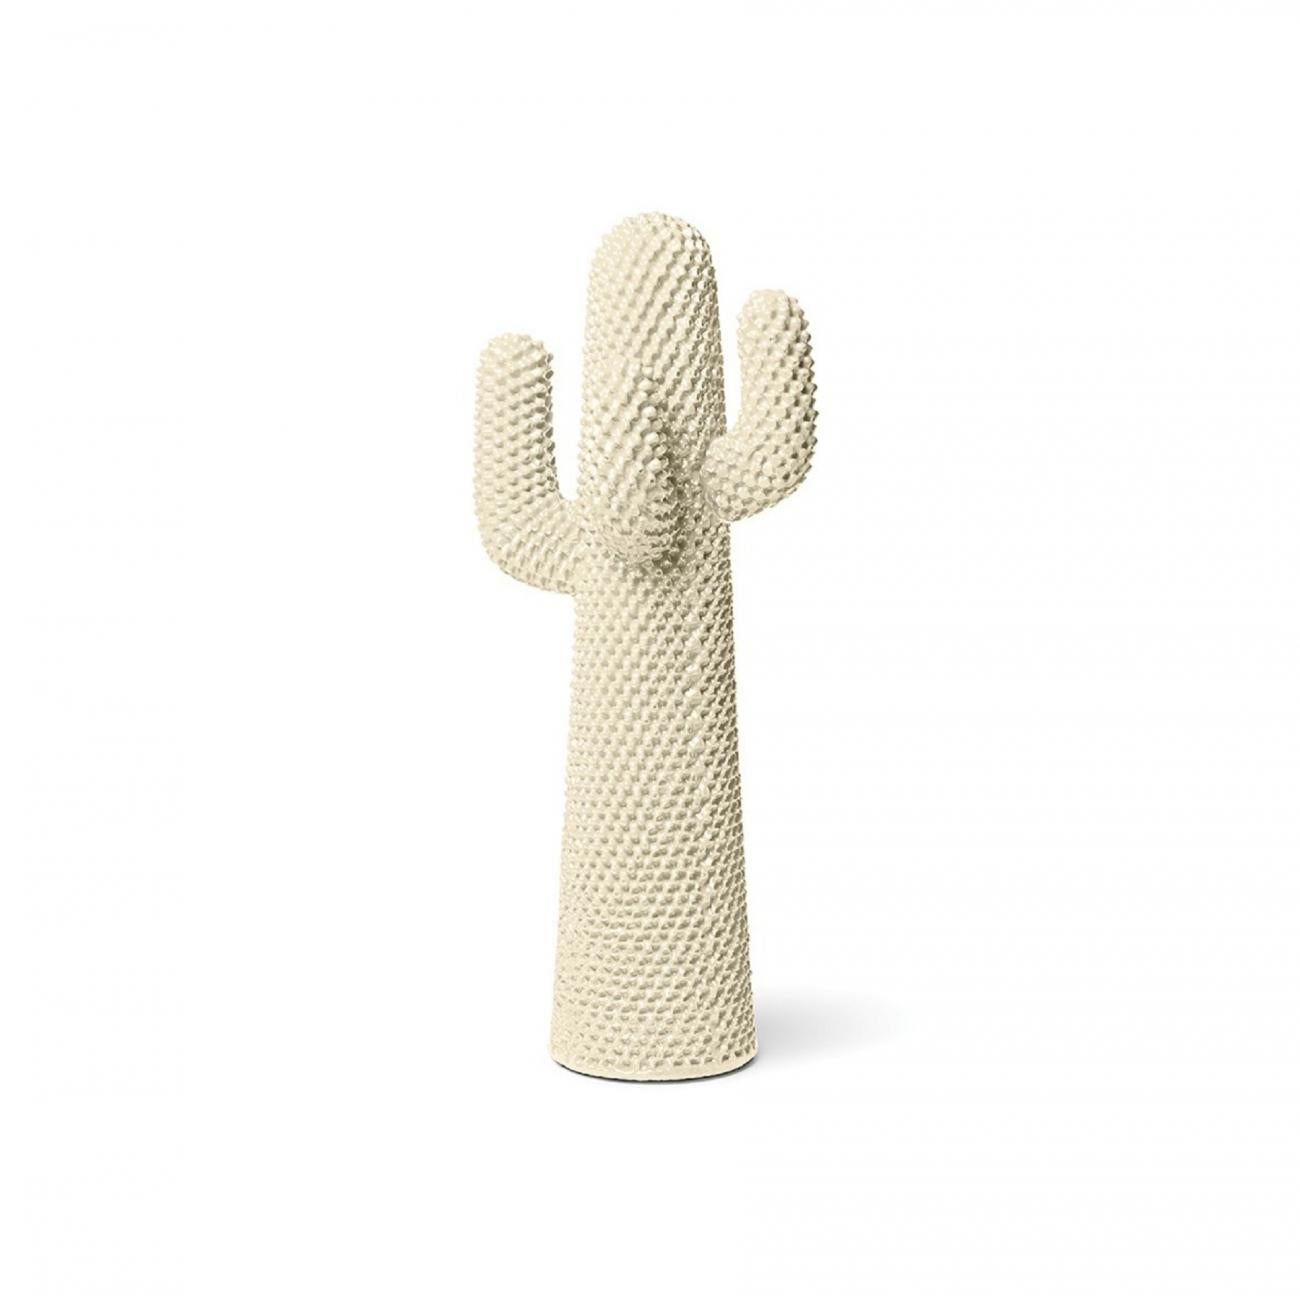 Gufram Another White Cactus Coat Stand By Drocco/Mello For Sale 1